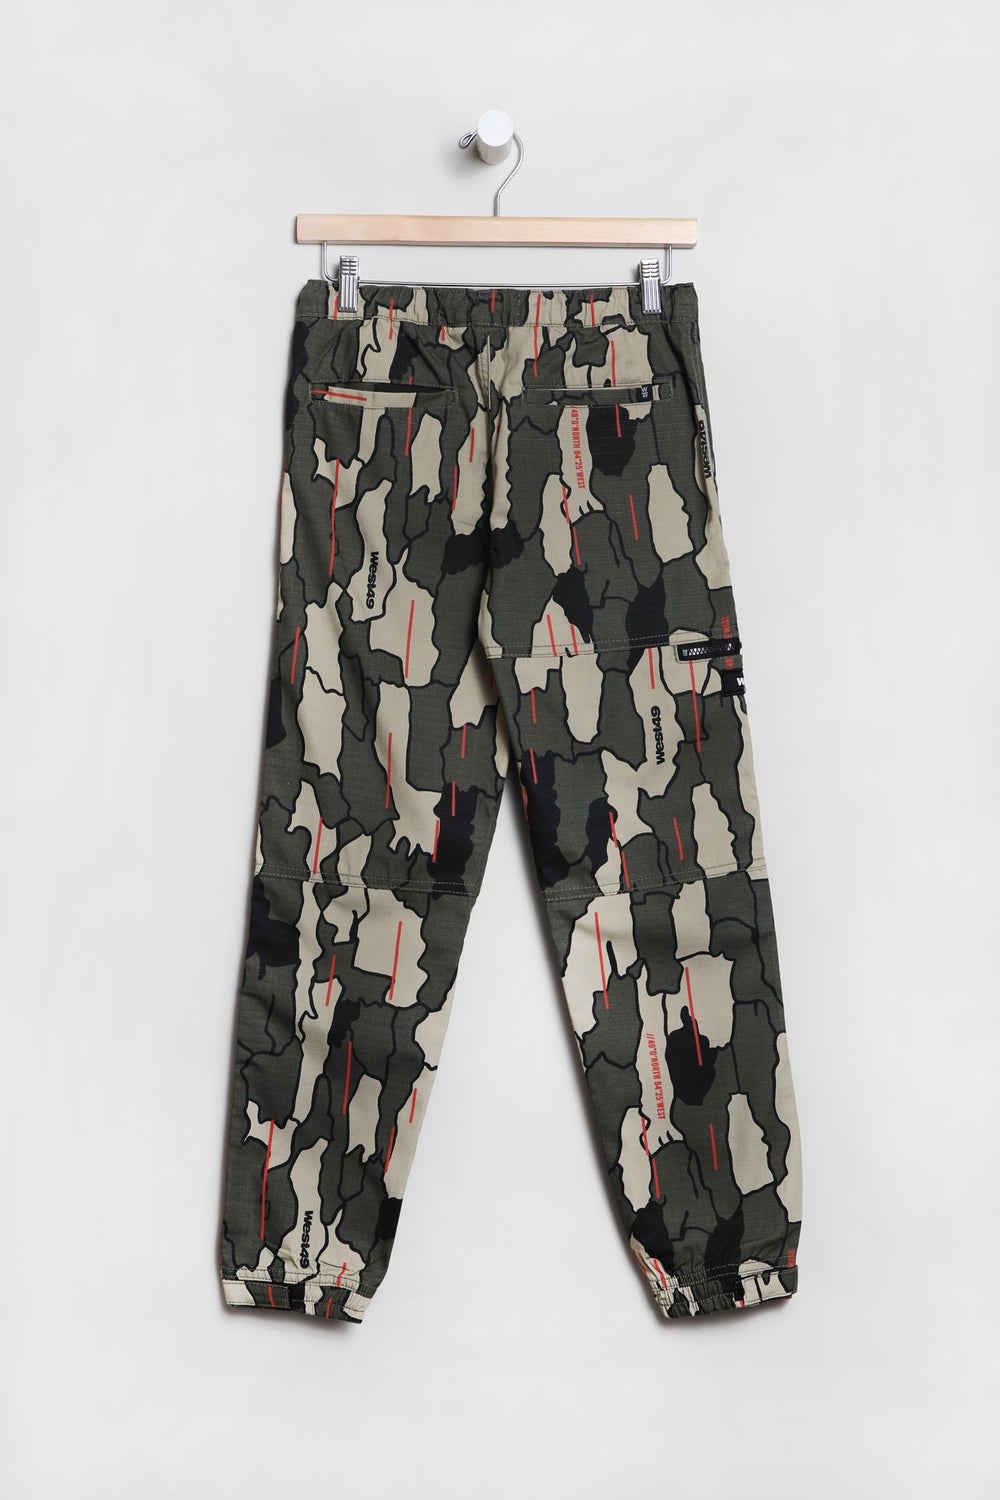 West49 Youth Mountain Camo Ripstop Jogger Camouflage